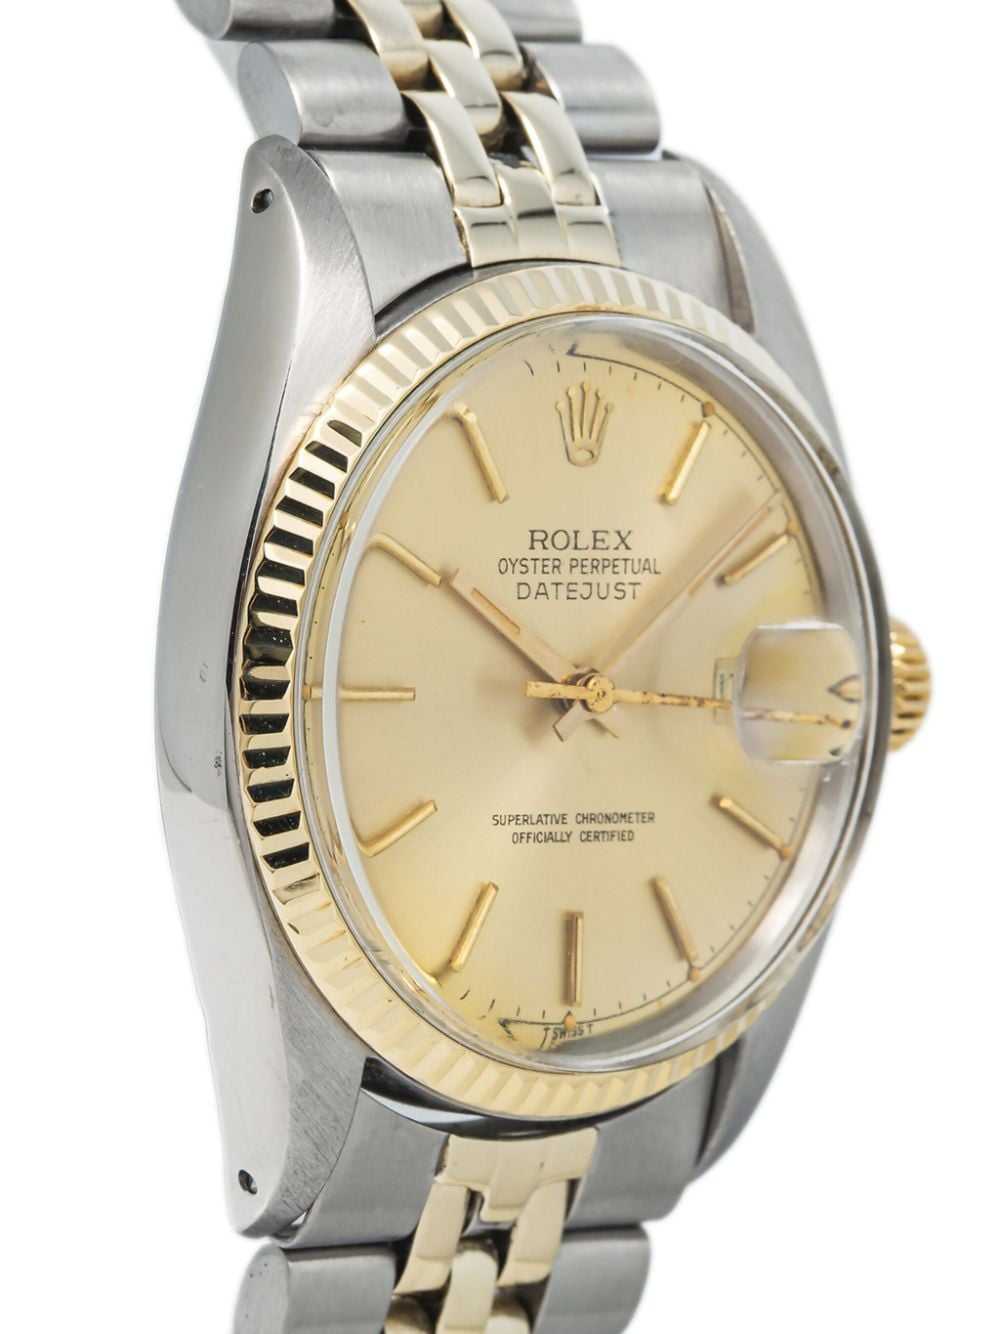 Rolex pre-owned Datejust 36mm - Gold - image 4